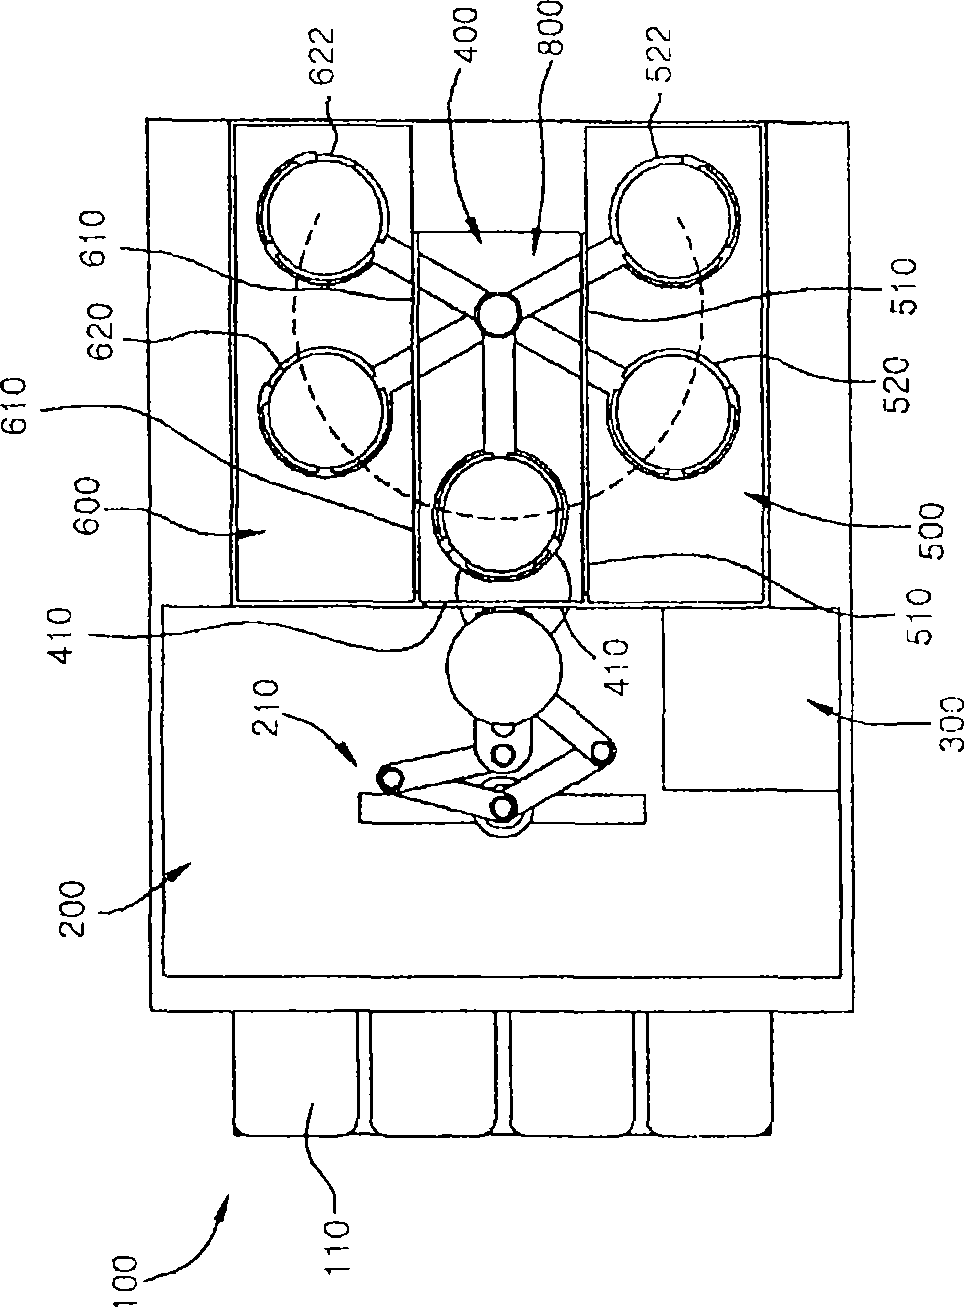 Substrate transfer equipment and substrate processing system using the same